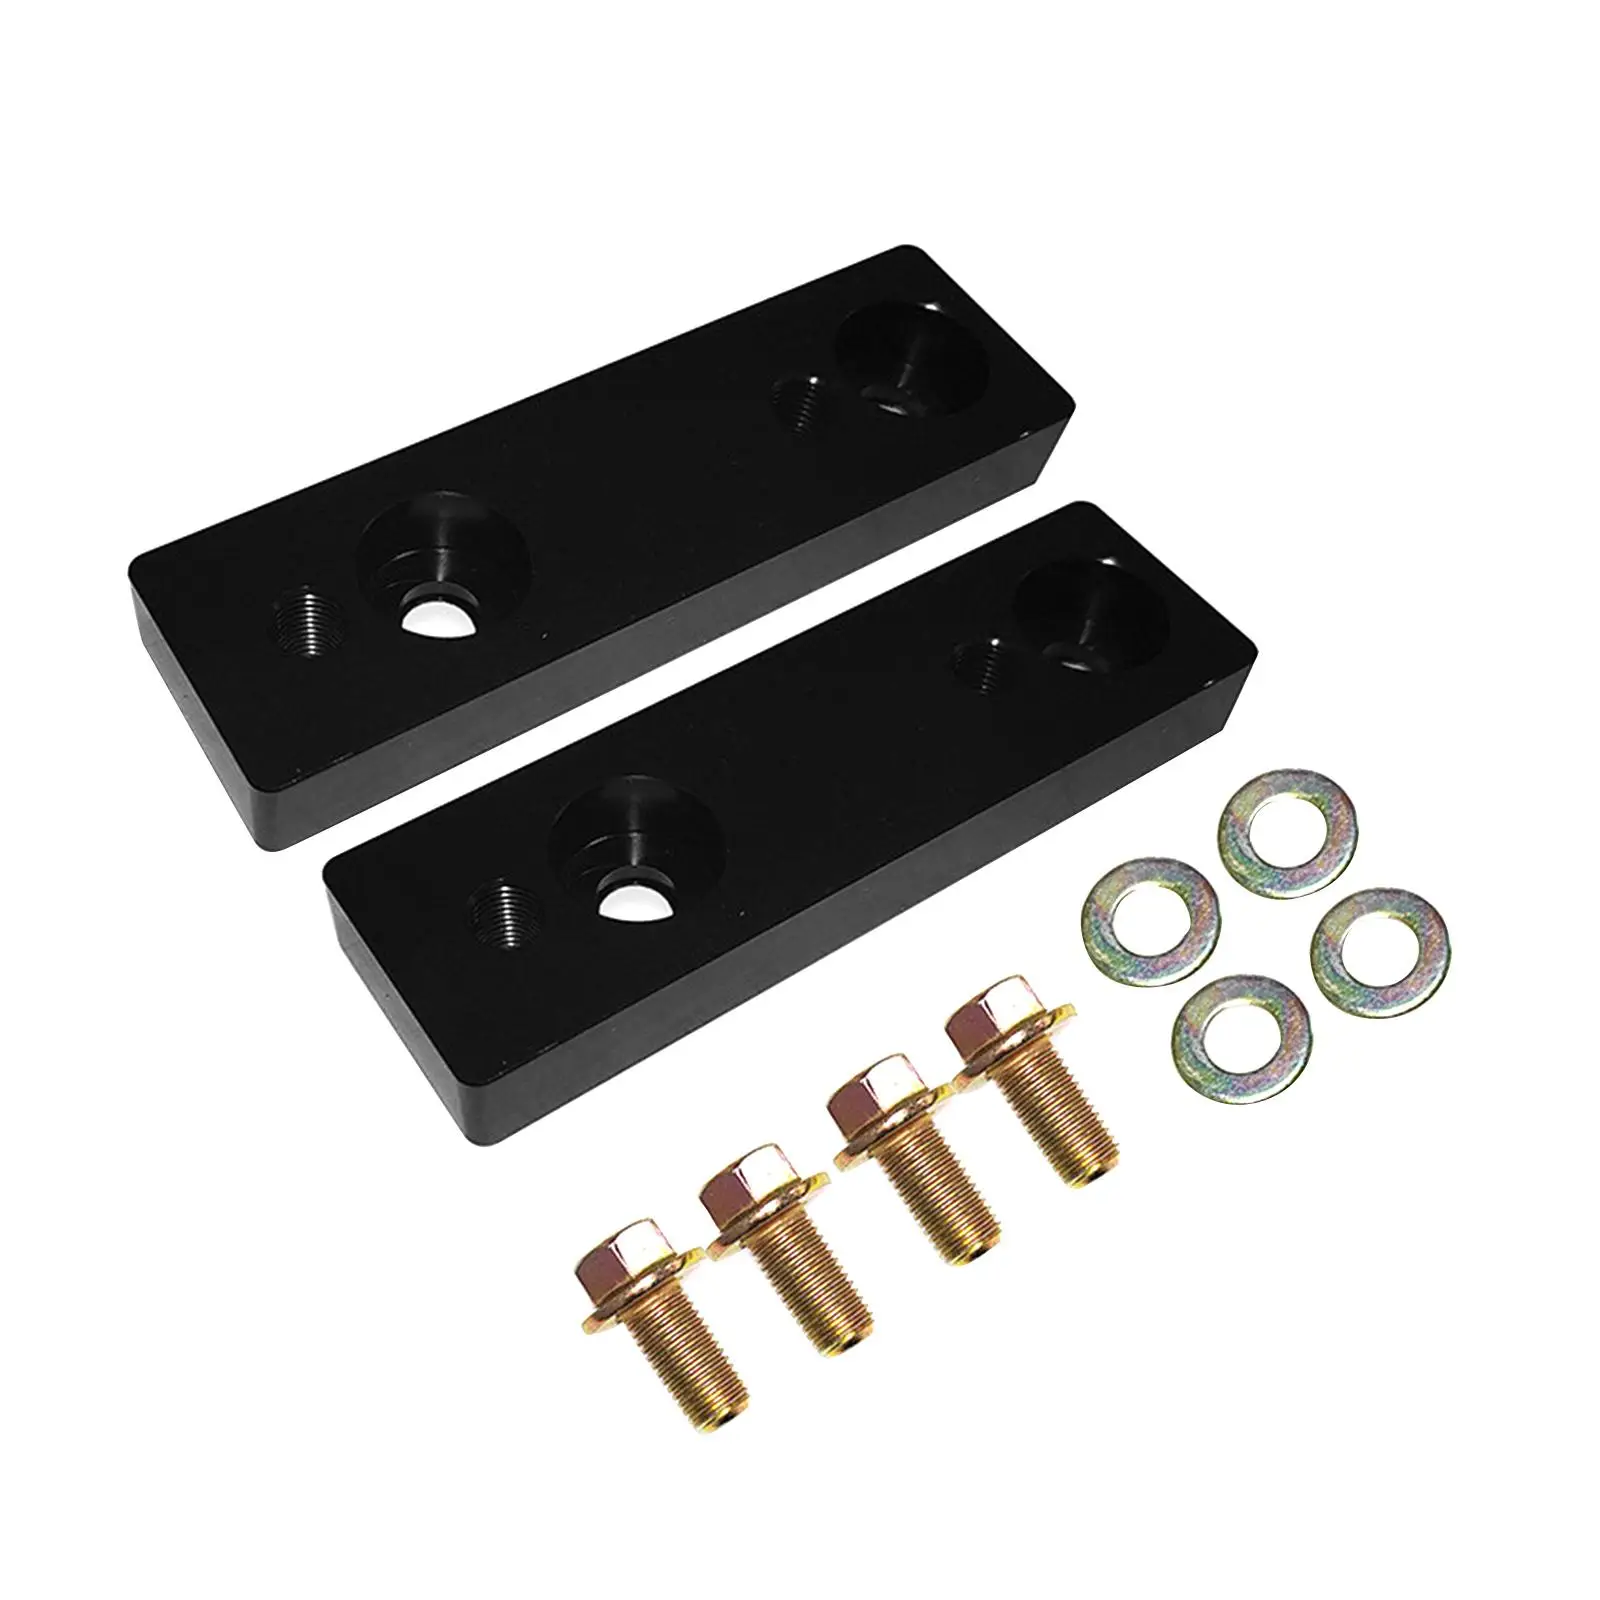 Lifts Sway Bar Drop Bracket Set Direct Replaces Car Accessory Easy to Install Spare Parts Sway Control Bracket for Tacoma